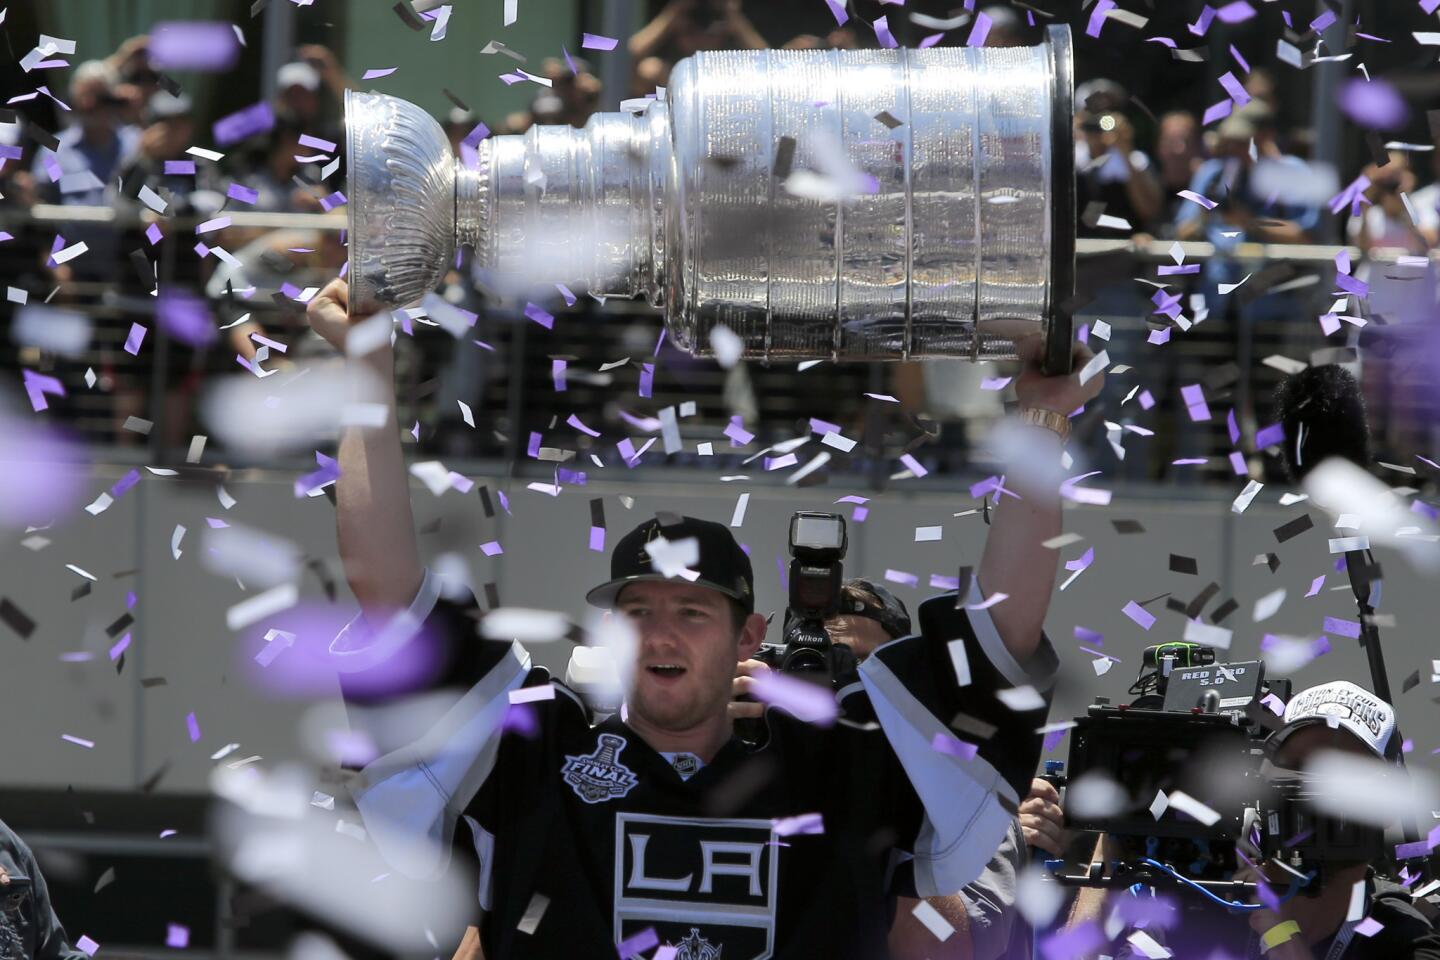 Stanley Cup victory parade: L.A. Kings fans line up early downtown